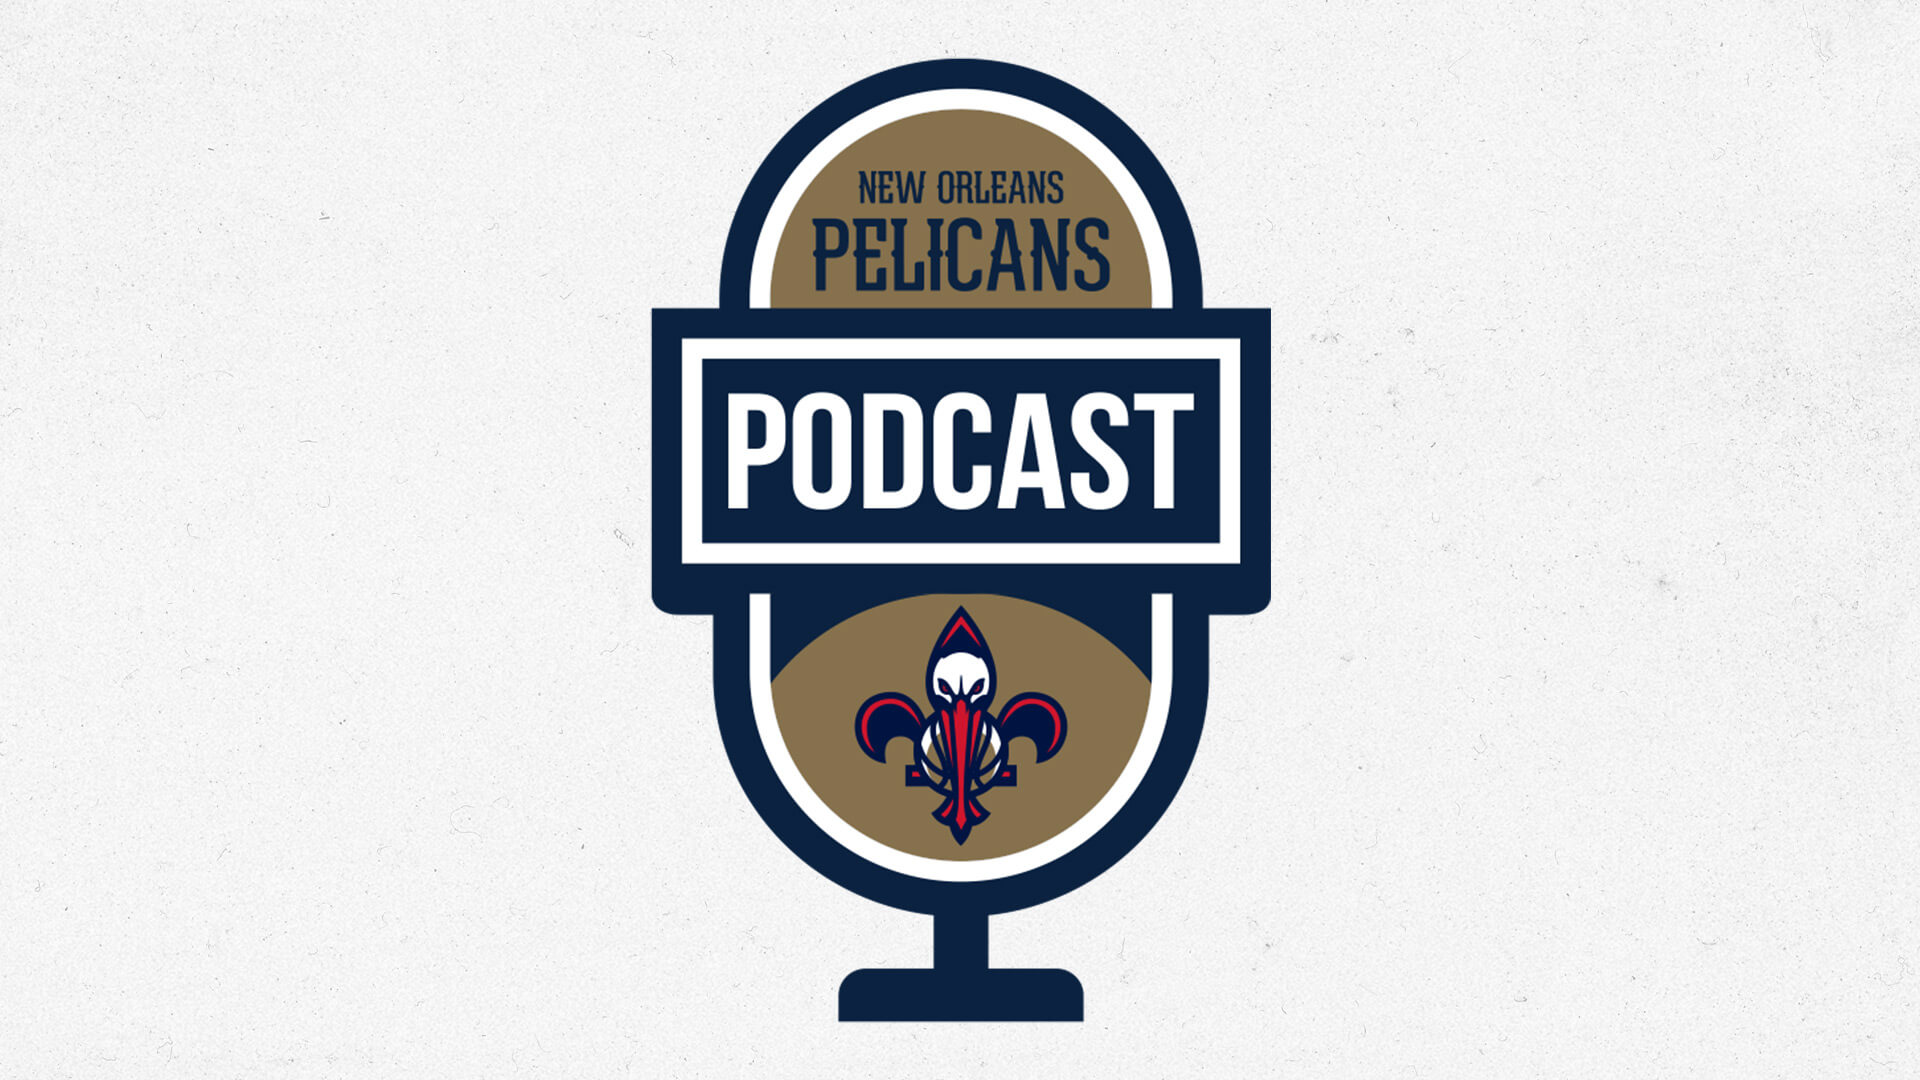 NBA analyst Jim Jackson on New Orleans Pelicans podcast presented by SeatGeek - April 20, 2021